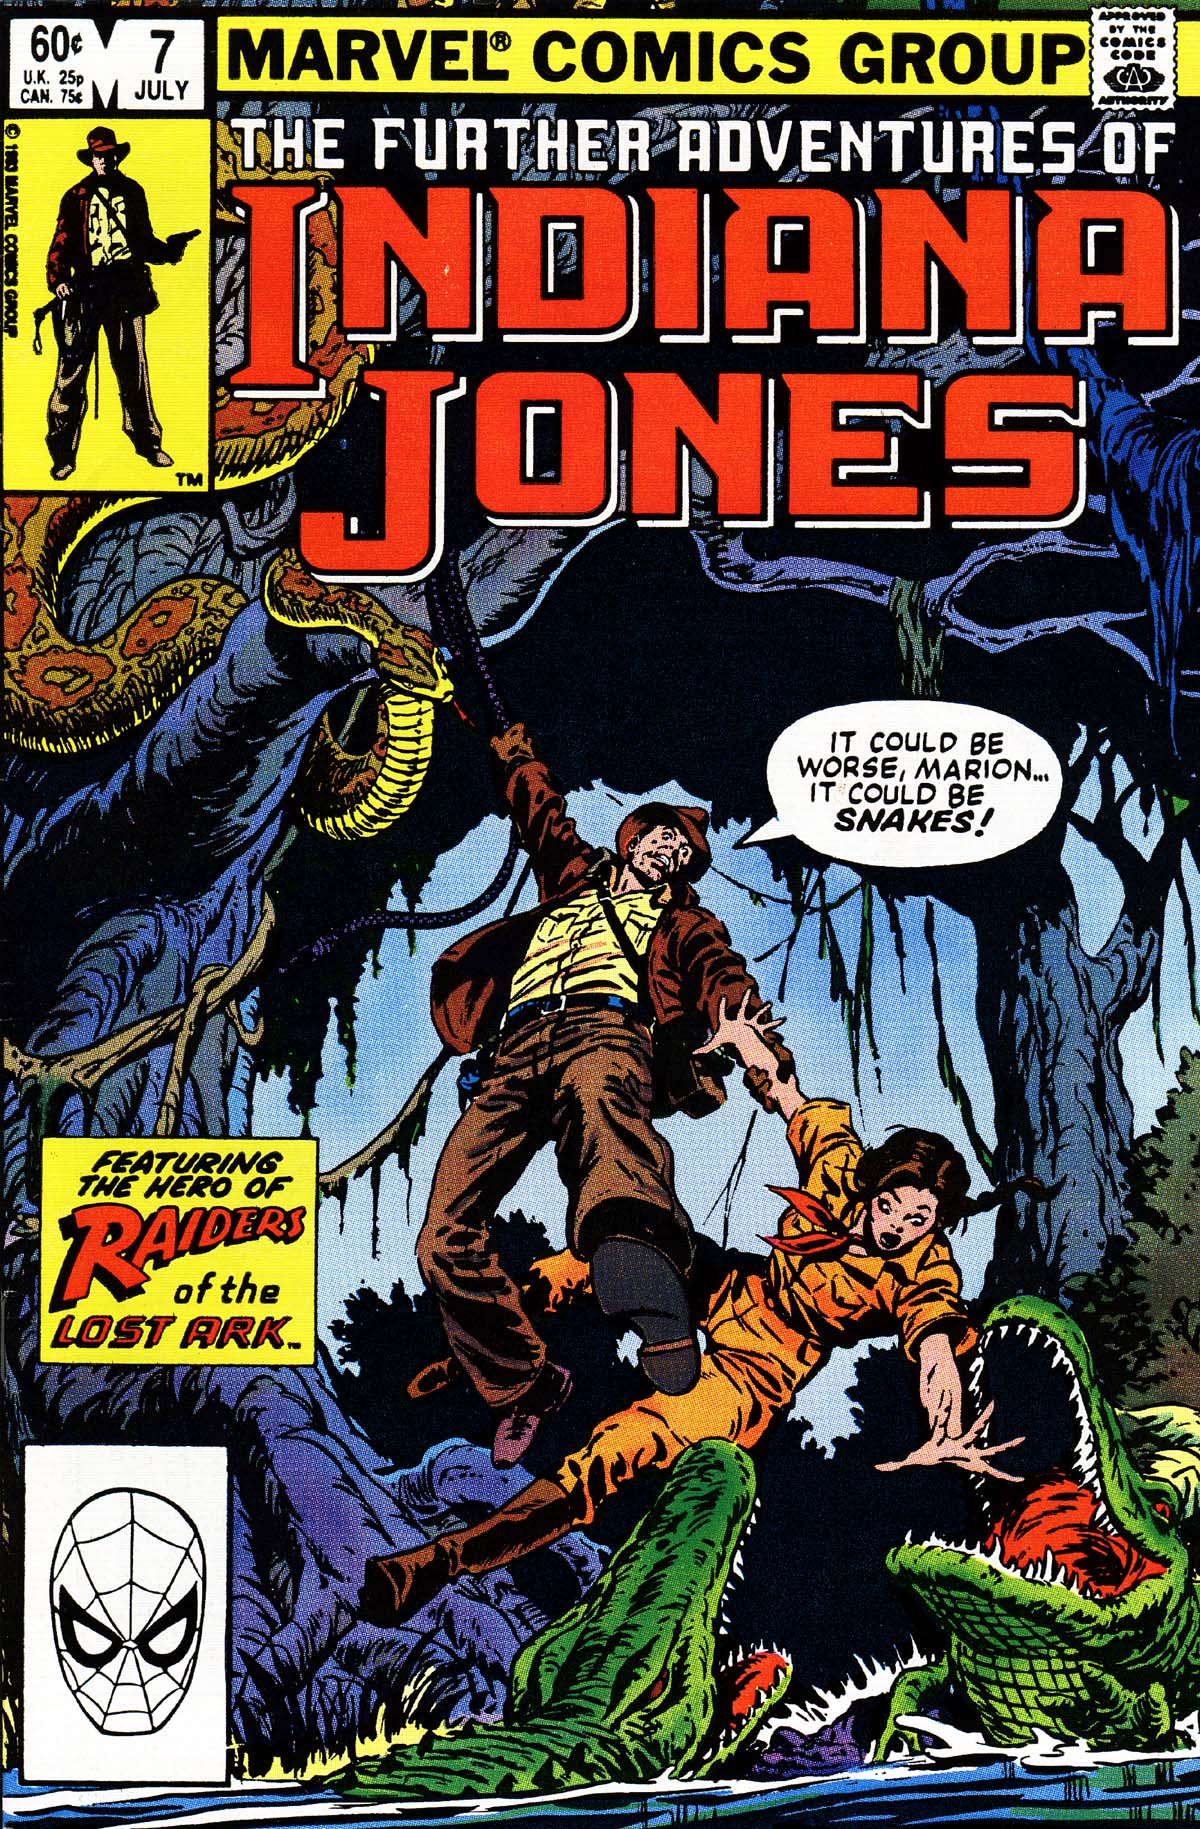 Read online The Further Adventures of Indiana Jones comic -  Issue #7 - 1